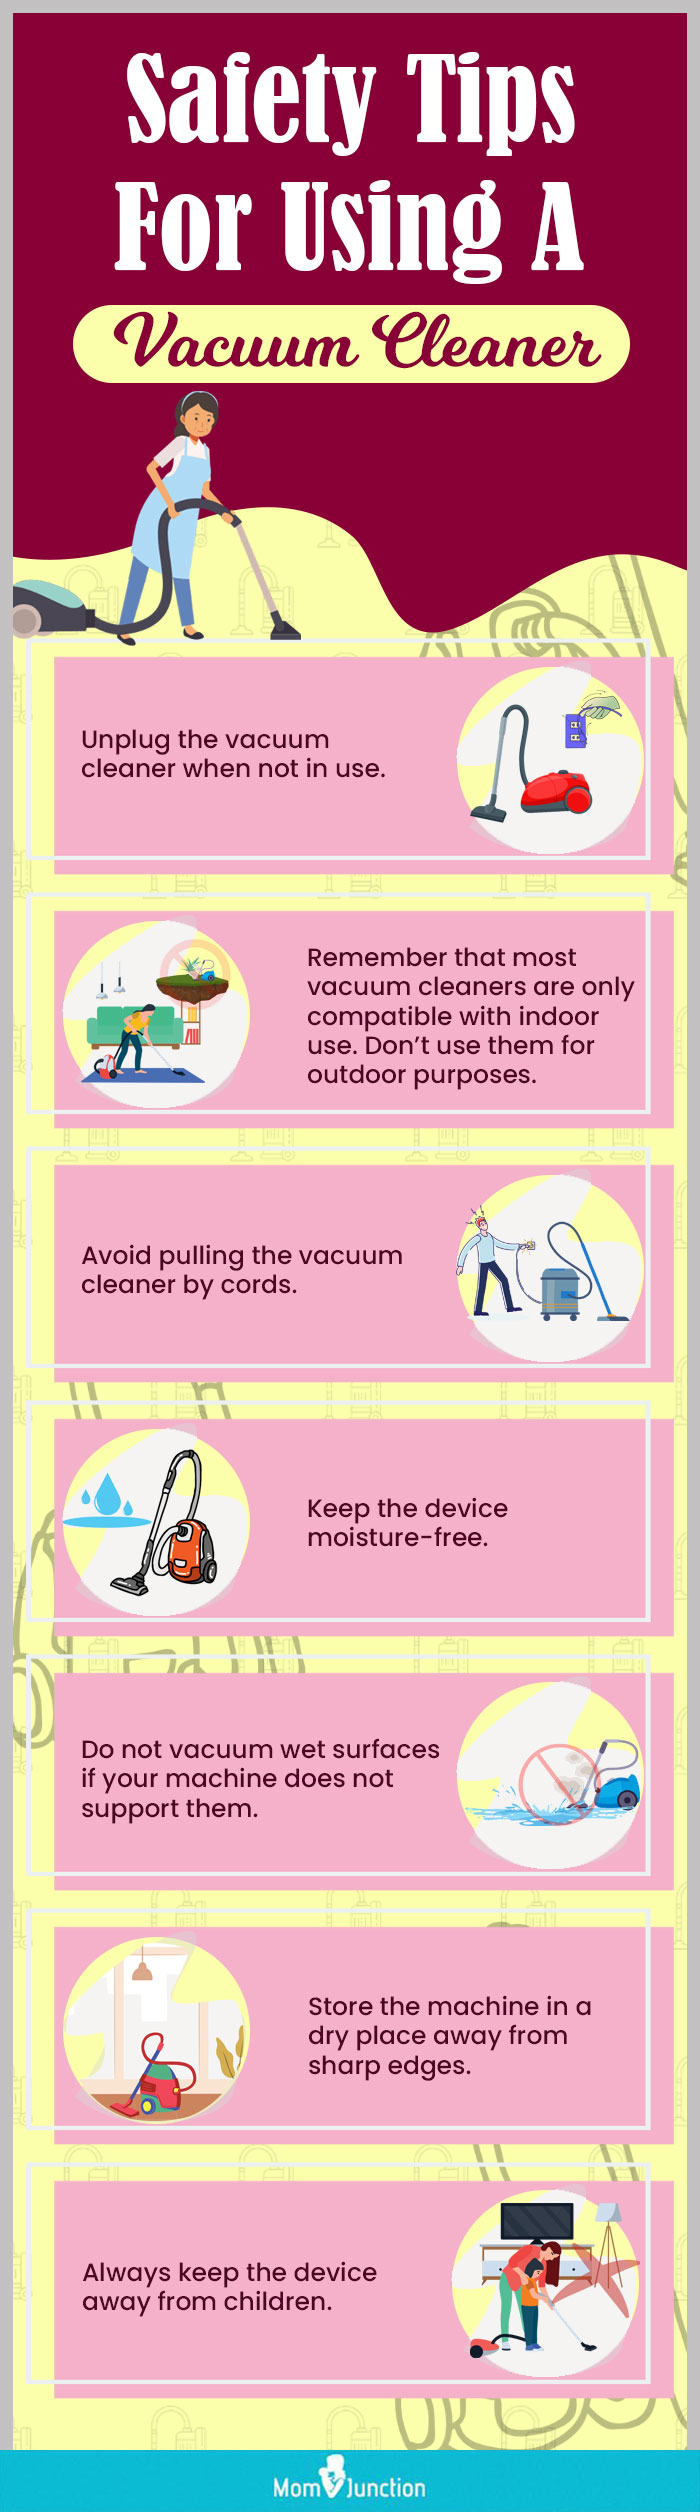 Safety Tips For Using A Vacuum Cleaner (infographic)